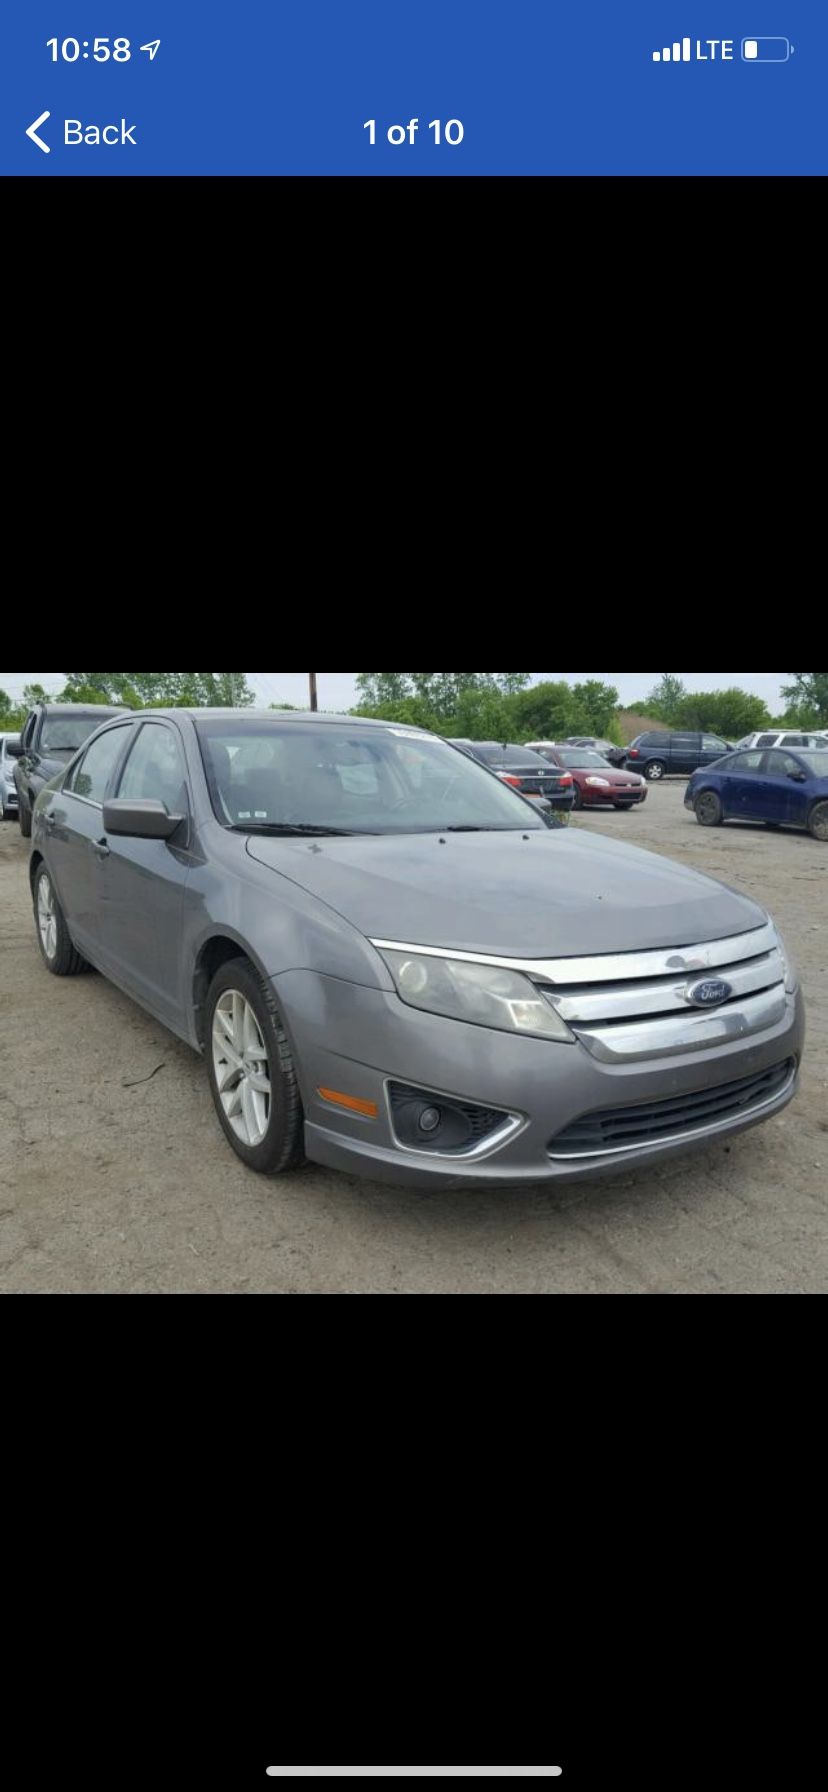 Ford Fusion - 20*11, V6, for parts only - SCRAP TITLE